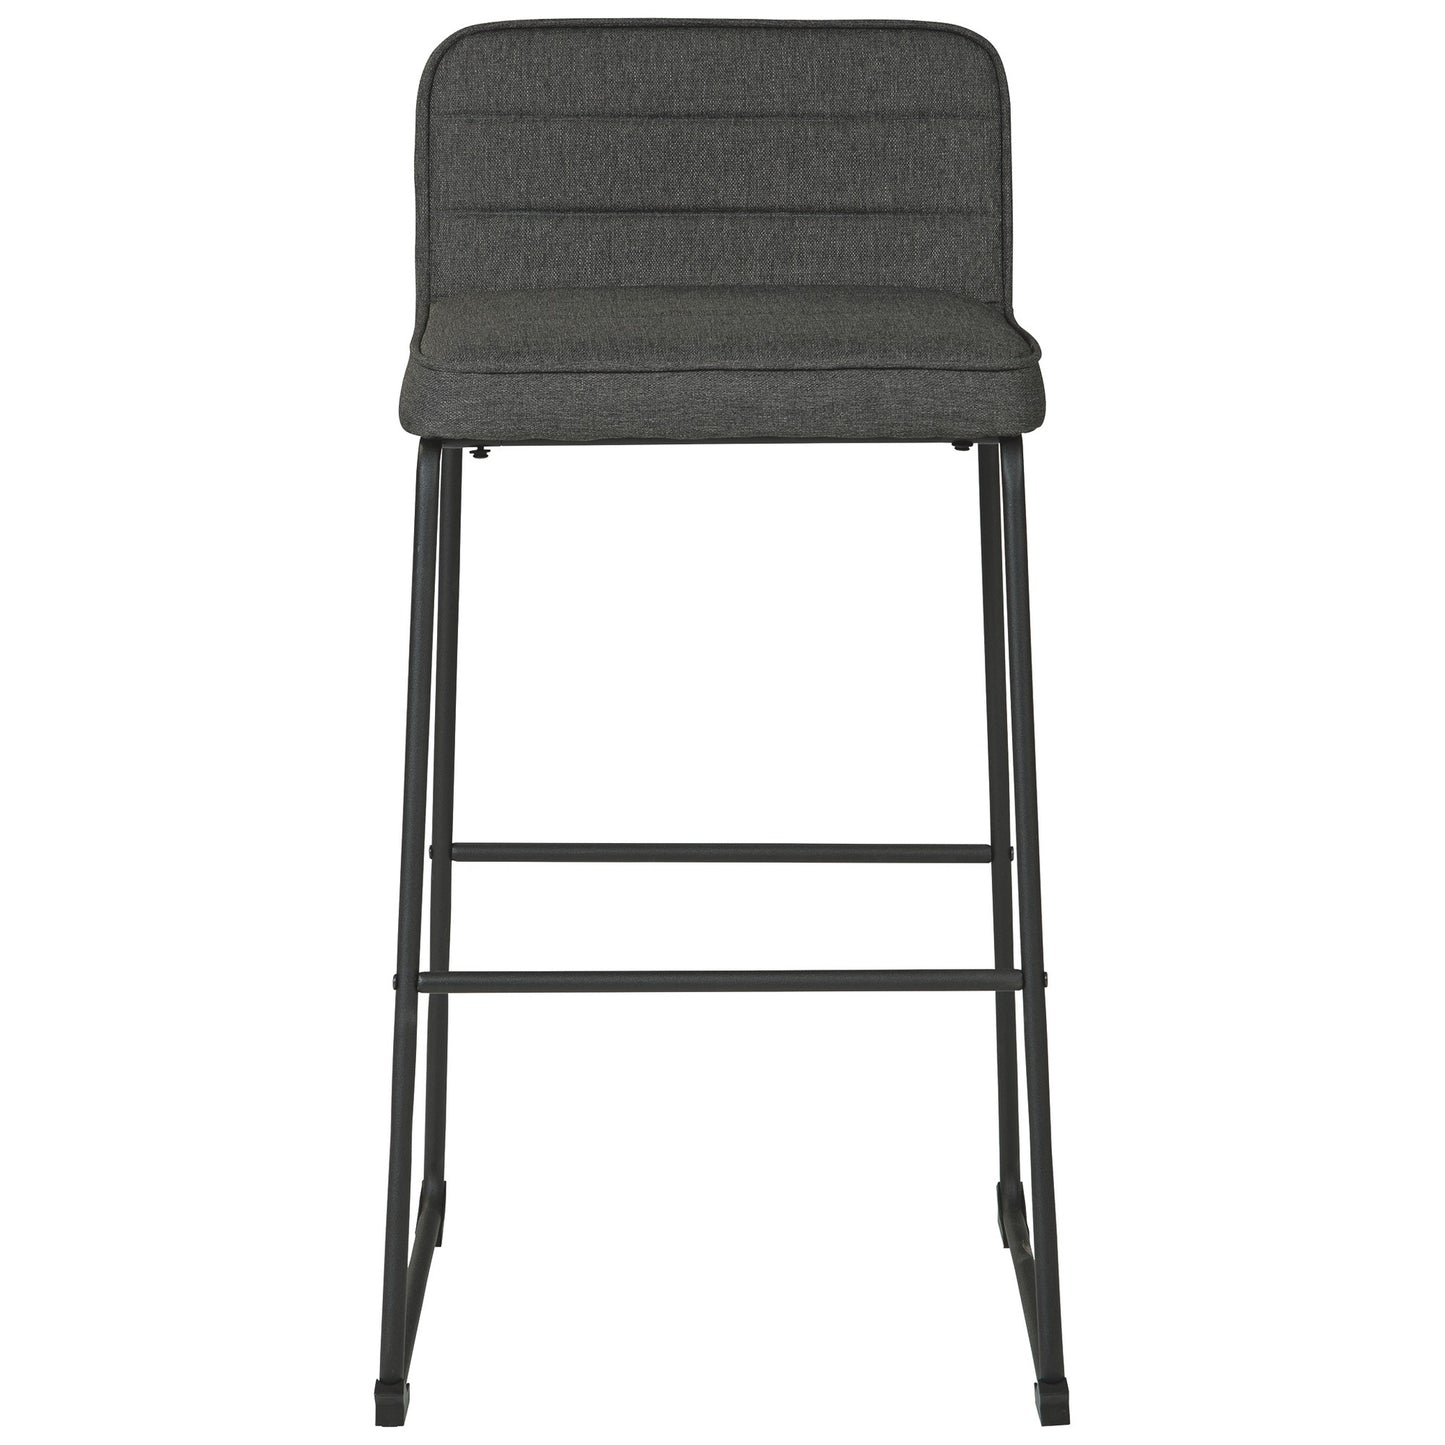 40 Inch Channel Stitched Low Fabric Bar Stool With Sled Base, Set Of 2